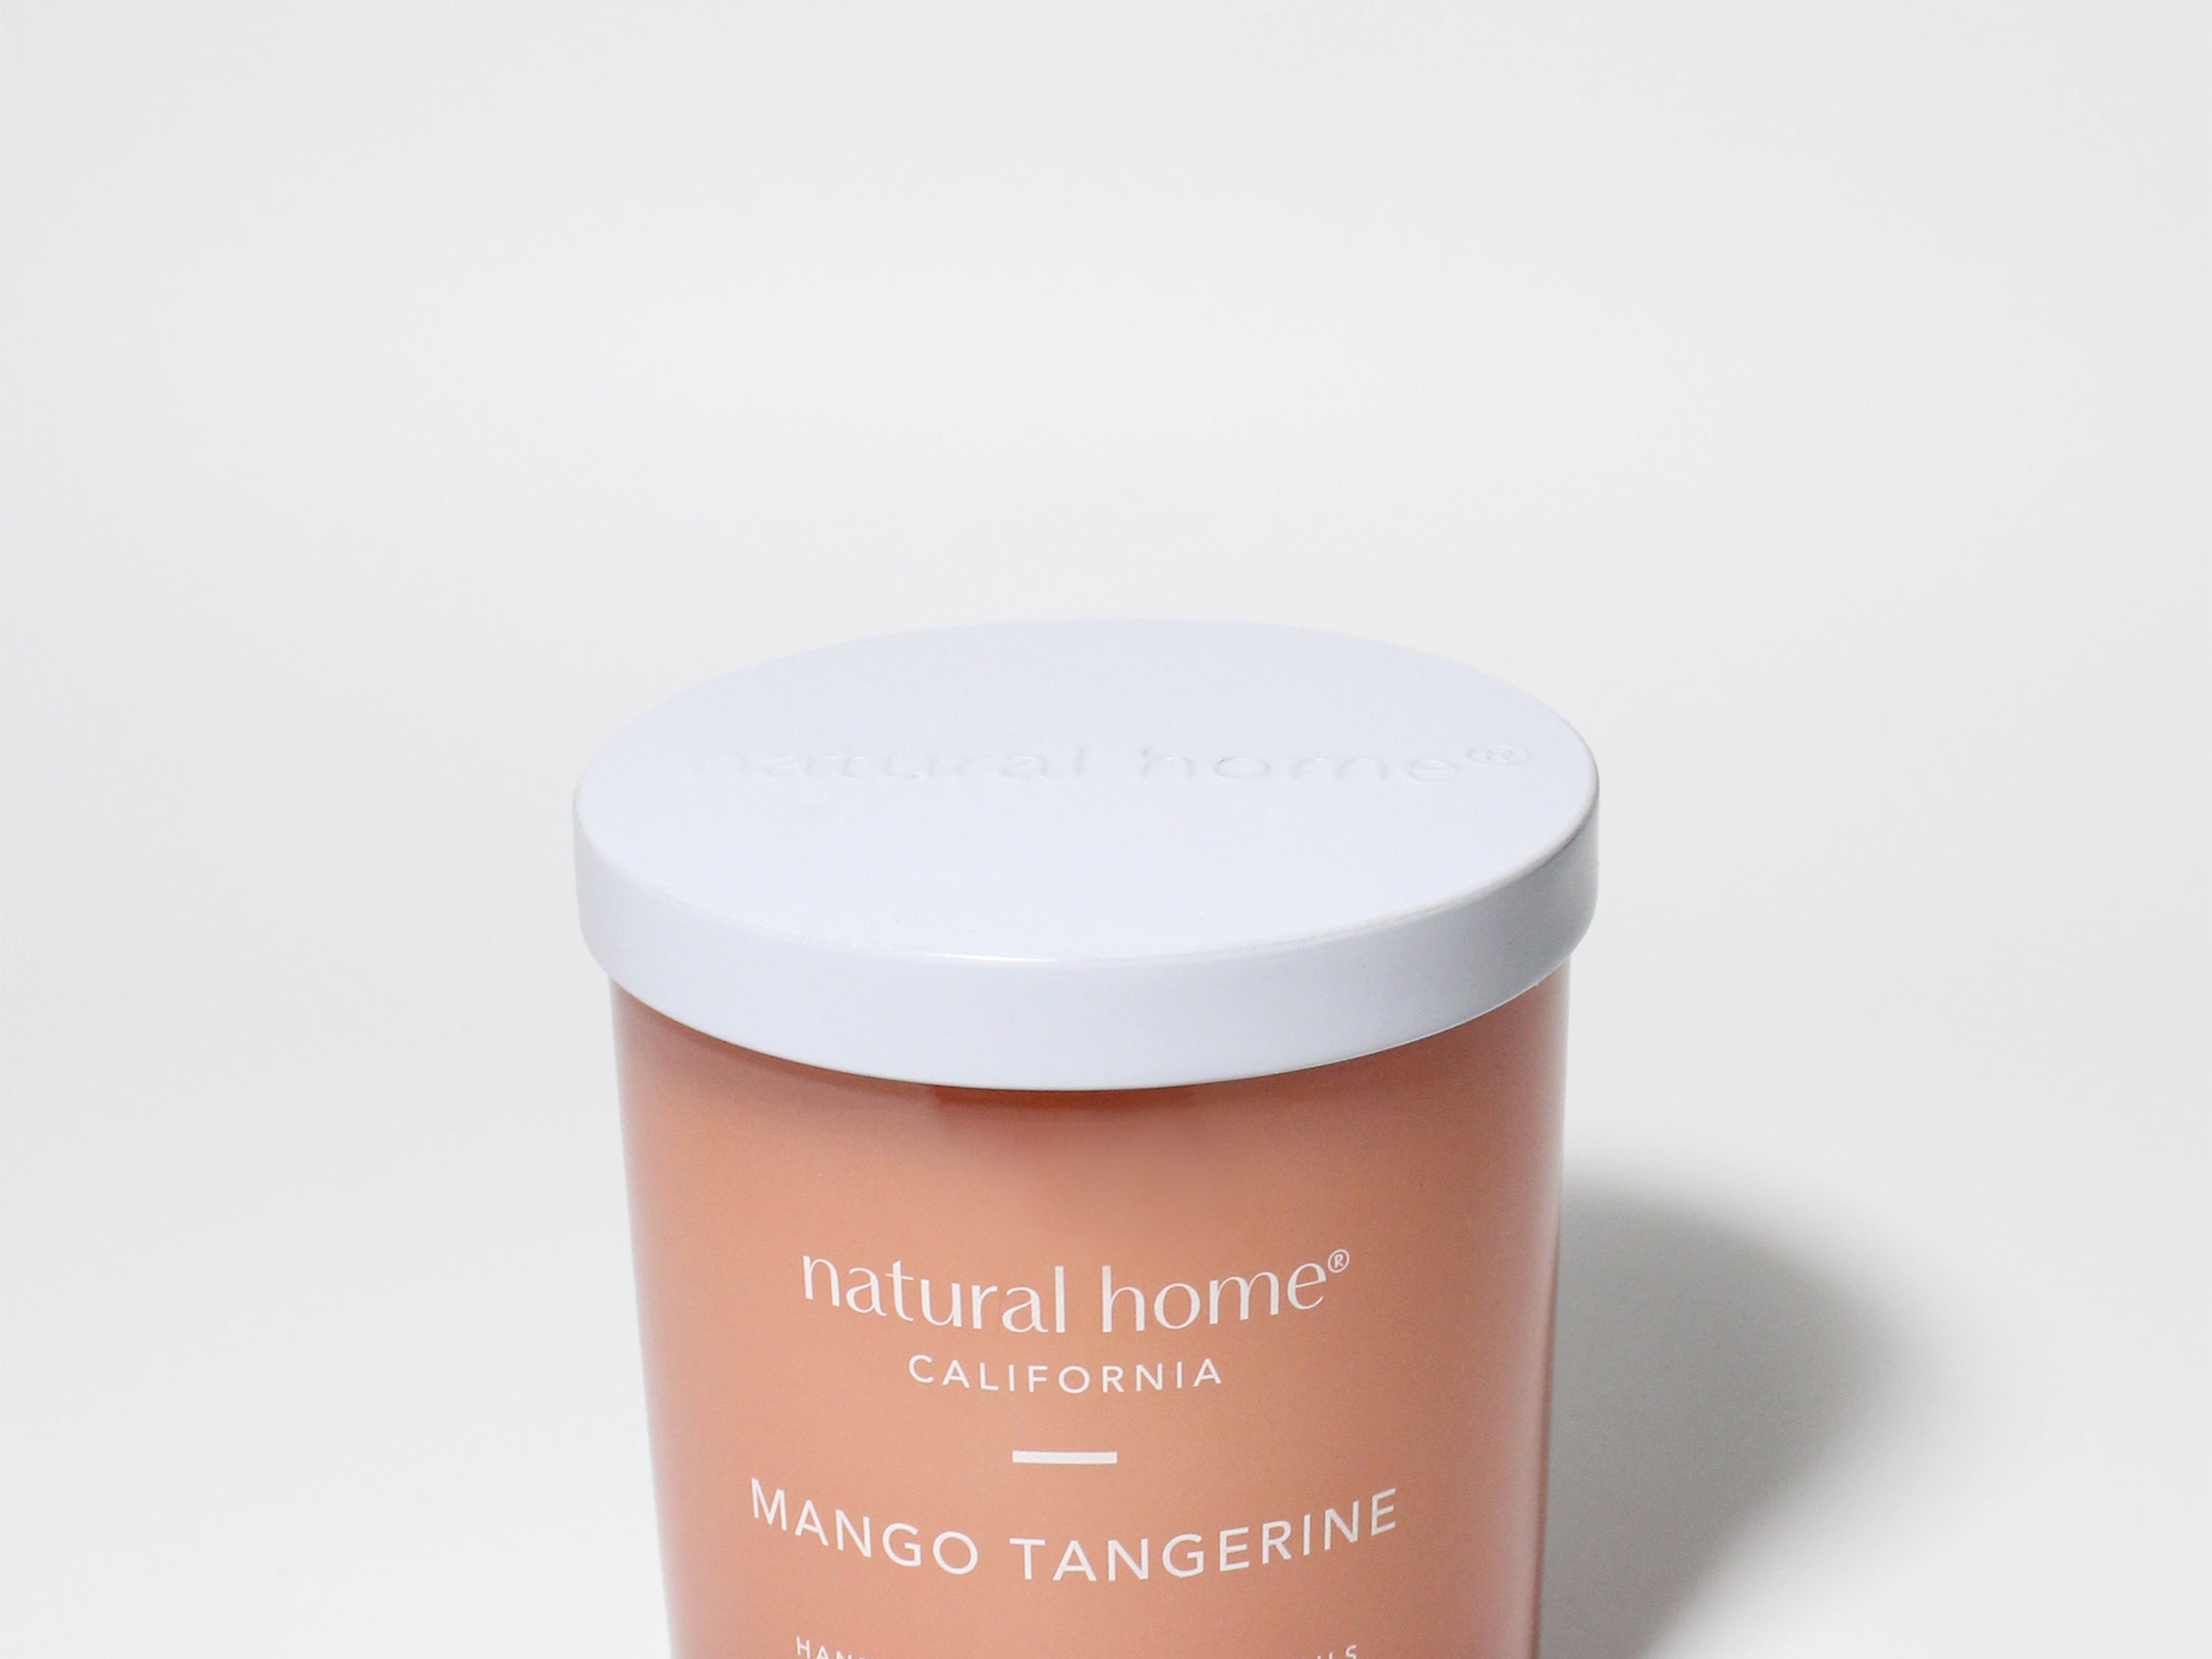 Mango Tangerine Natural Home 11.5 oz scented candle Coral vessel with metal lid and one wick